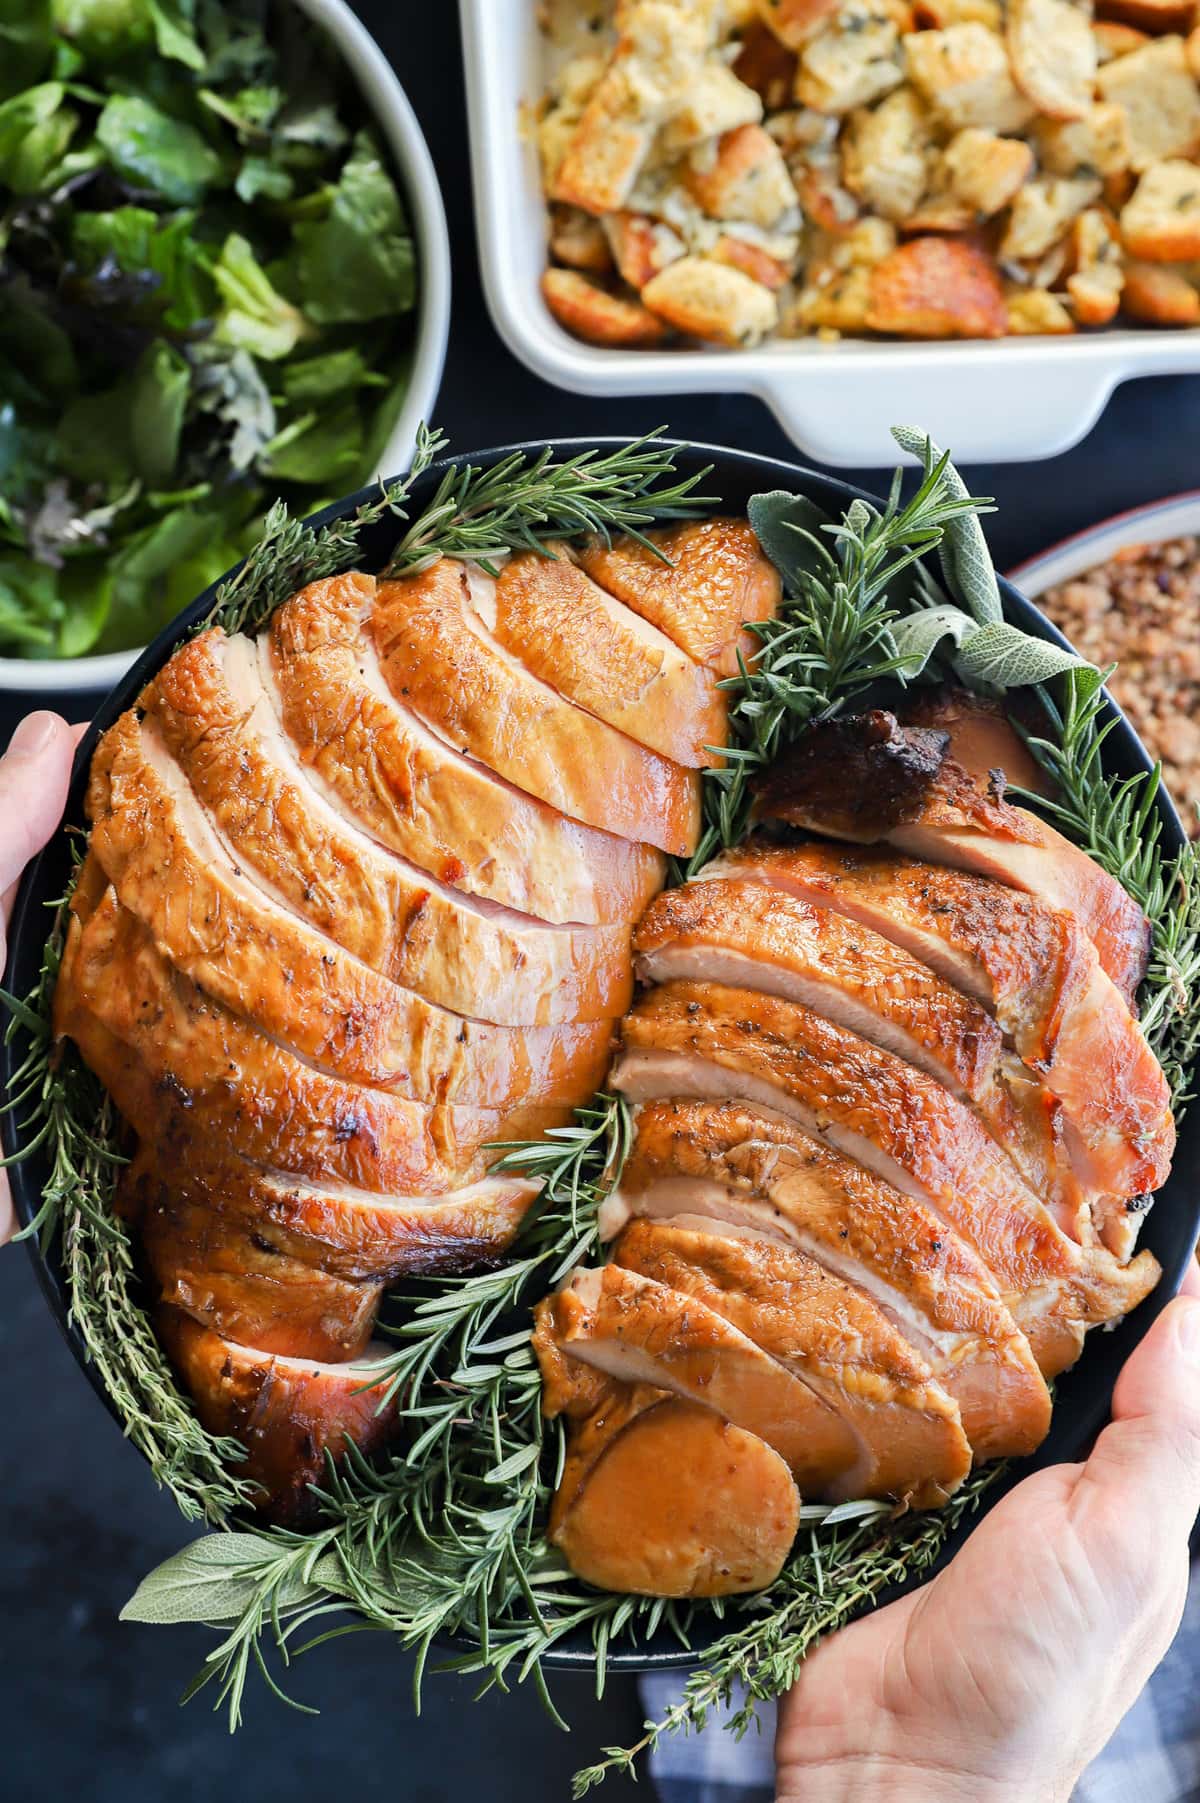 The BEST Smoked Turkey Breast - Easy, Delicious, Flavorful!